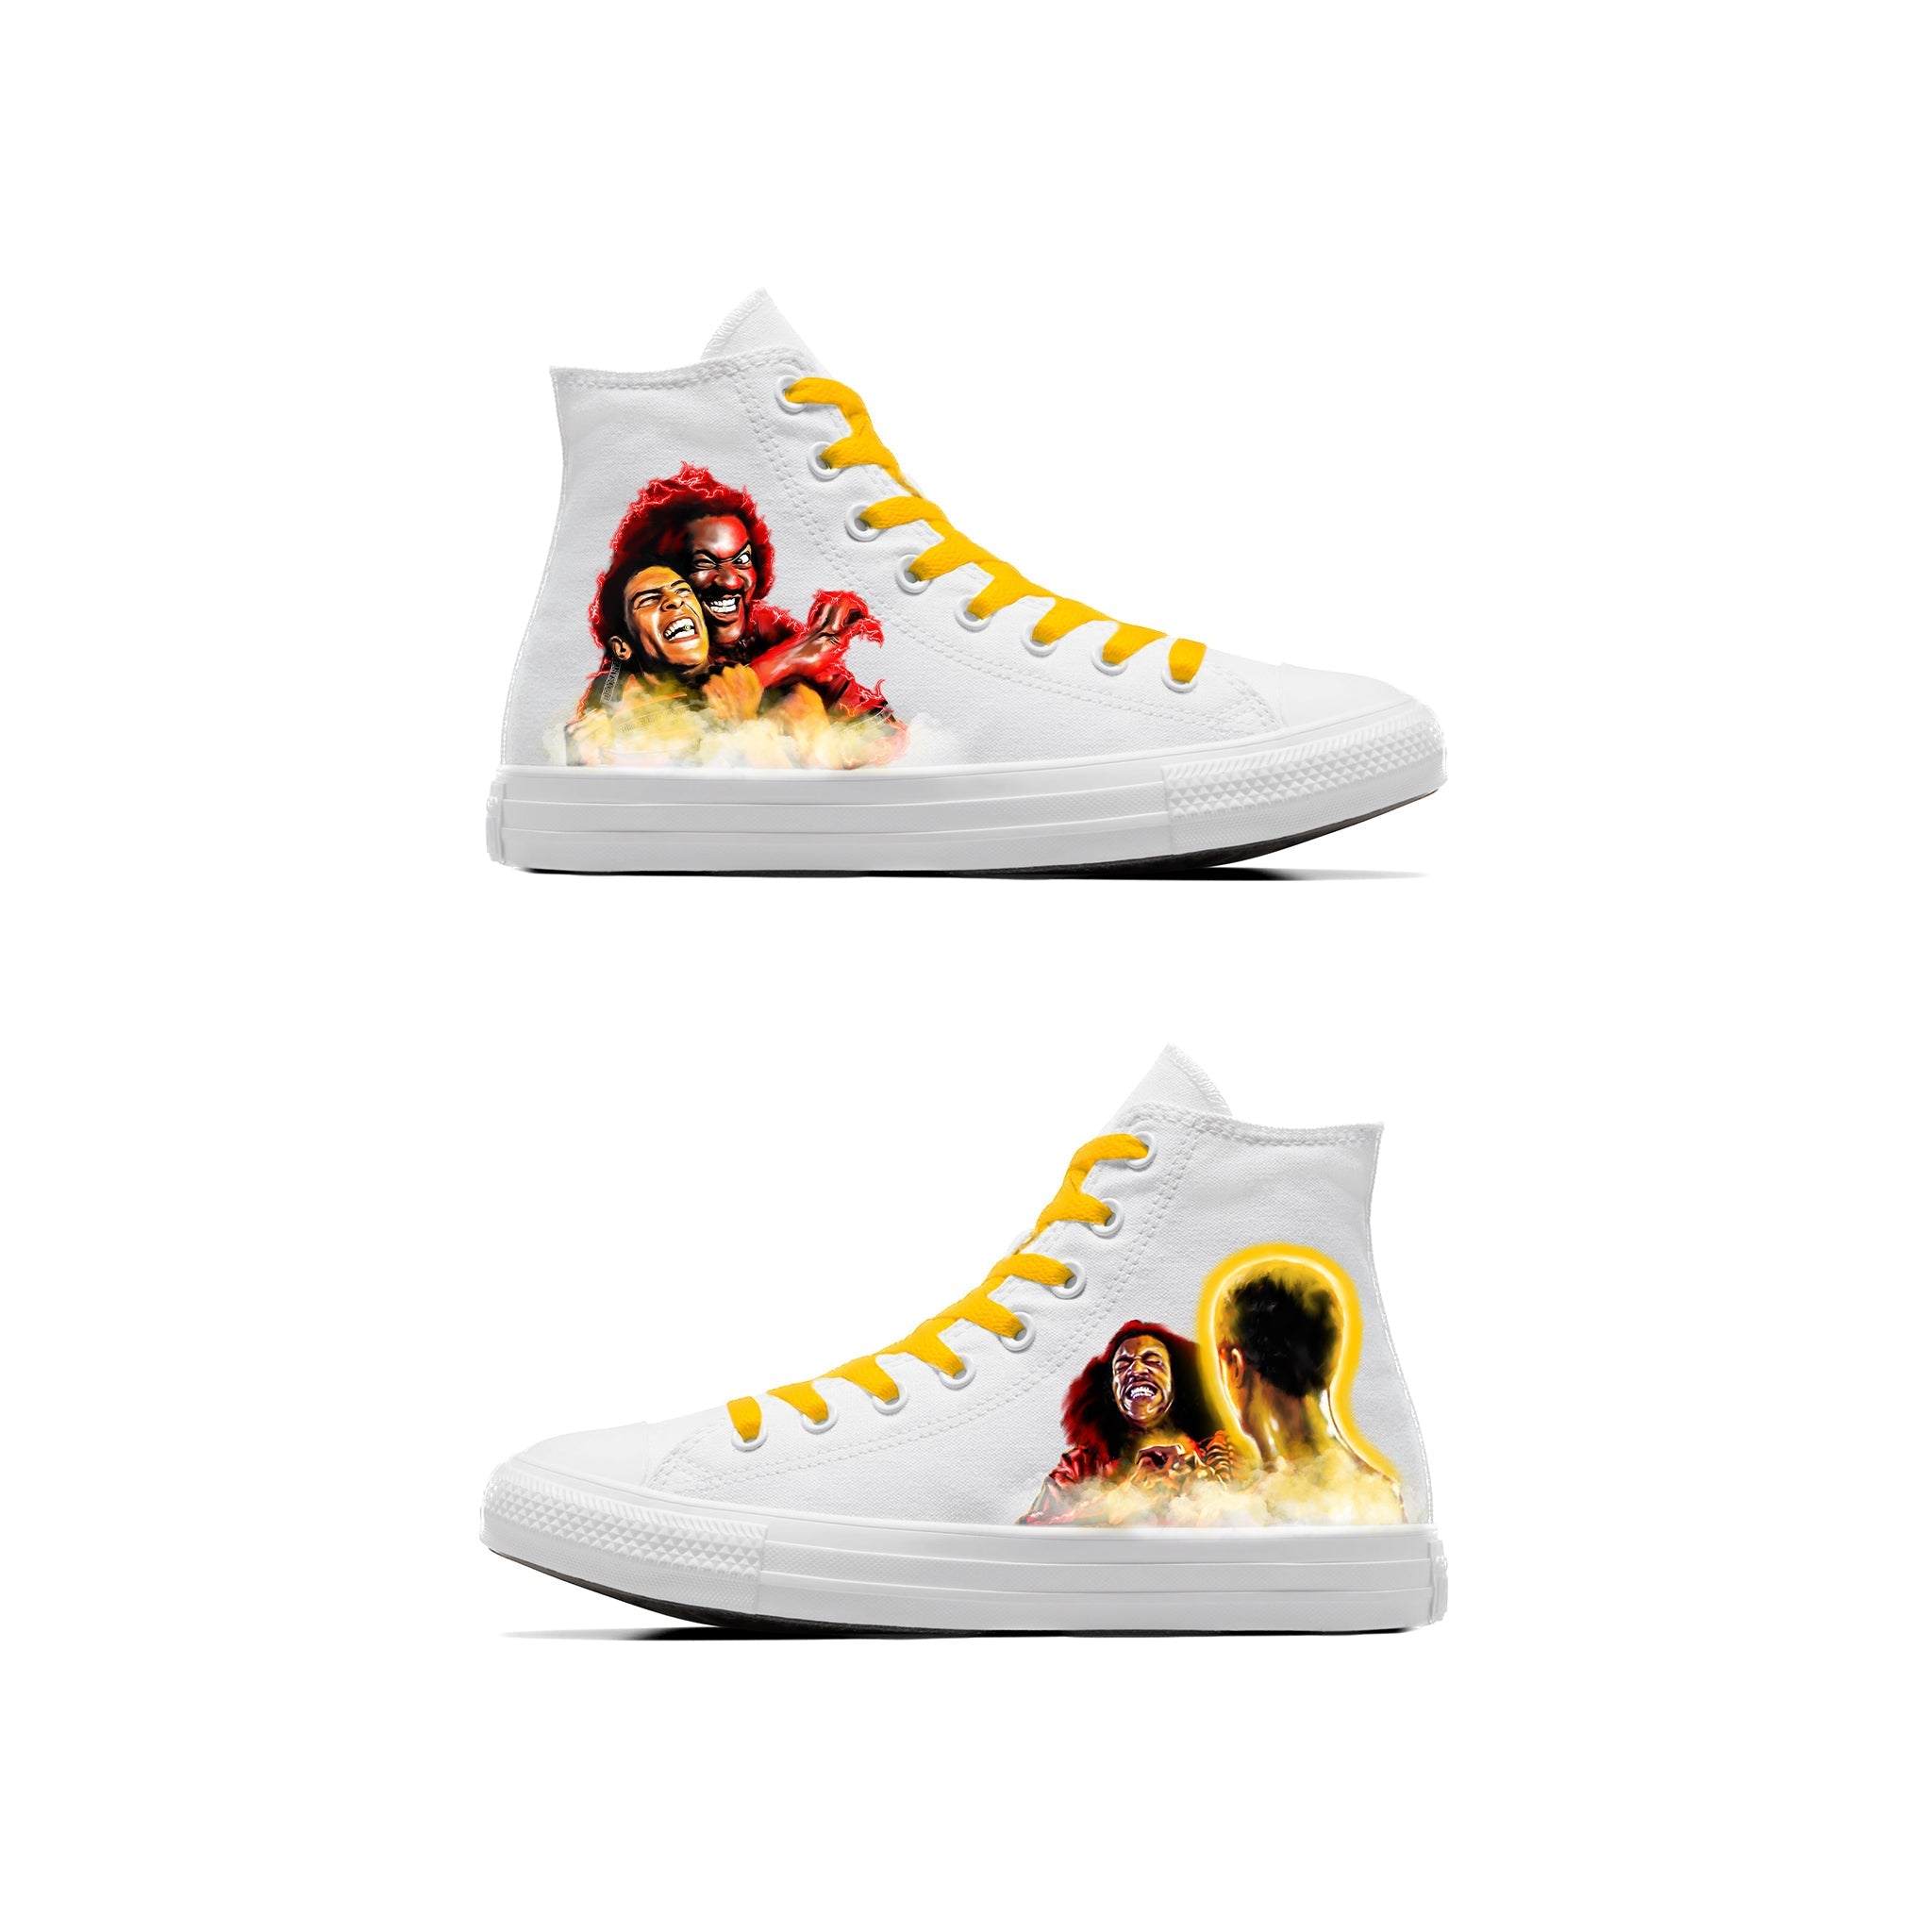 Bruce Leroy "I Am" The Master Cloud White Converse - Androo's Art